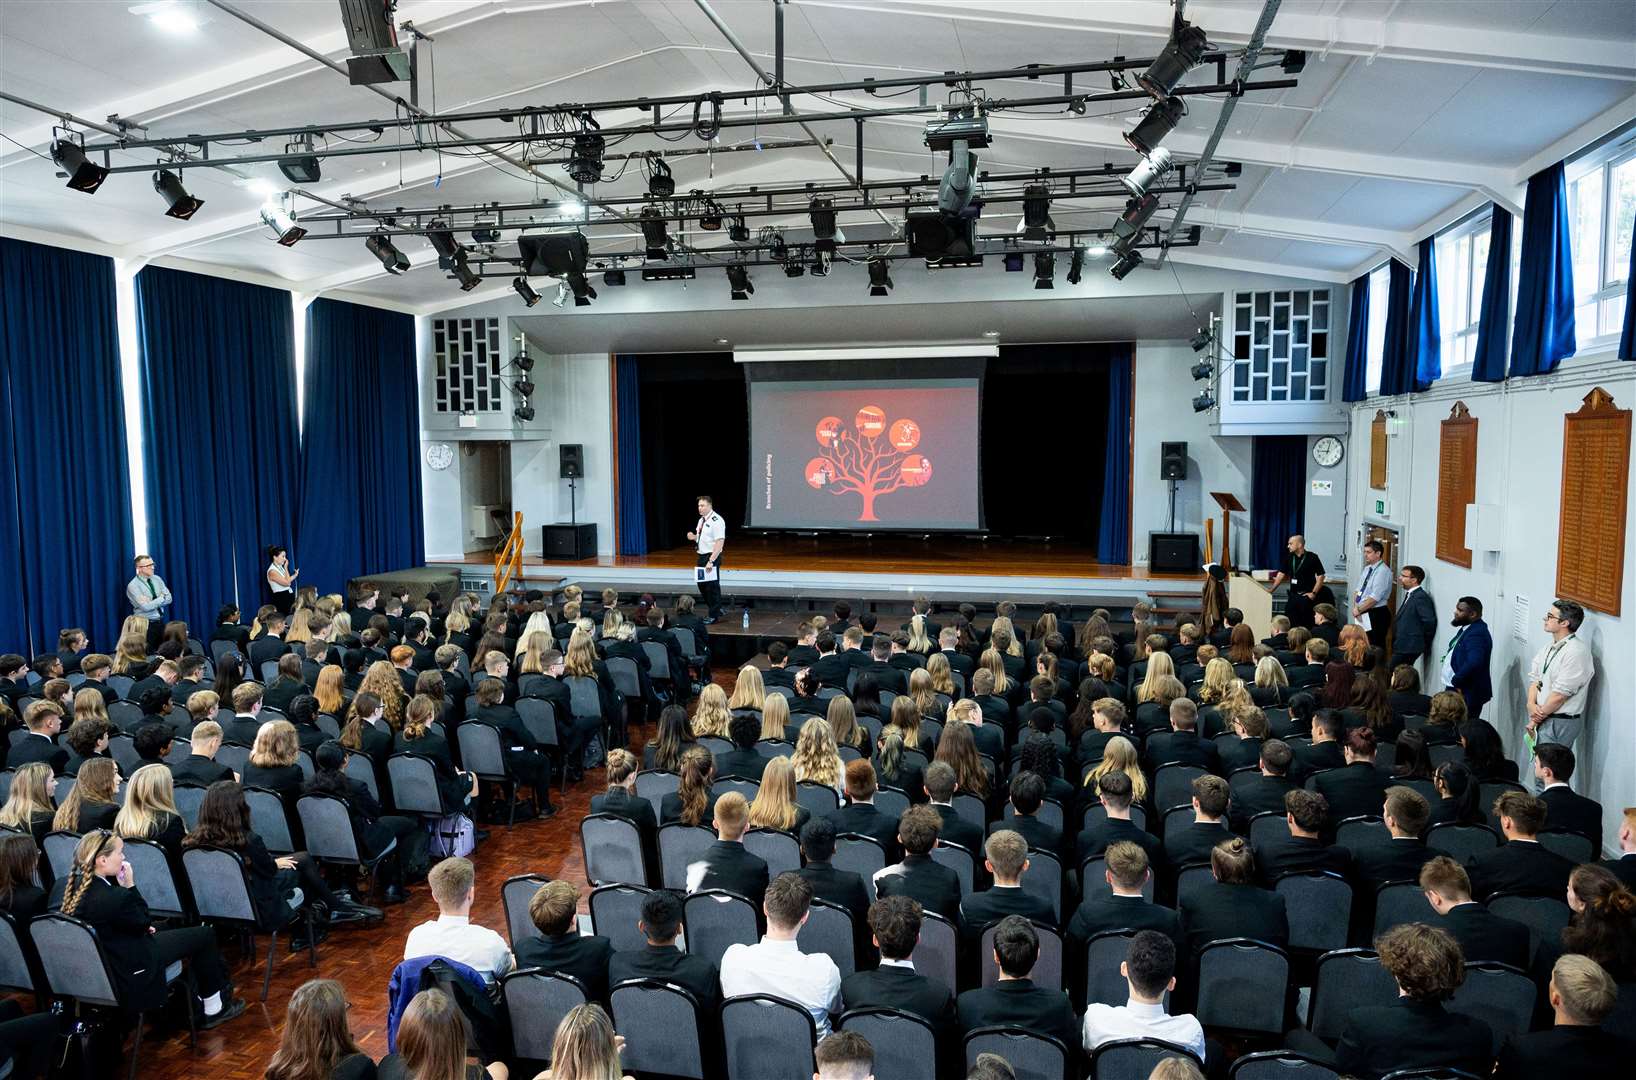 A senior Norfolk police officer told a school assembly about his career and said he hoped some of the Year 11 group would be future officers in the county's force.